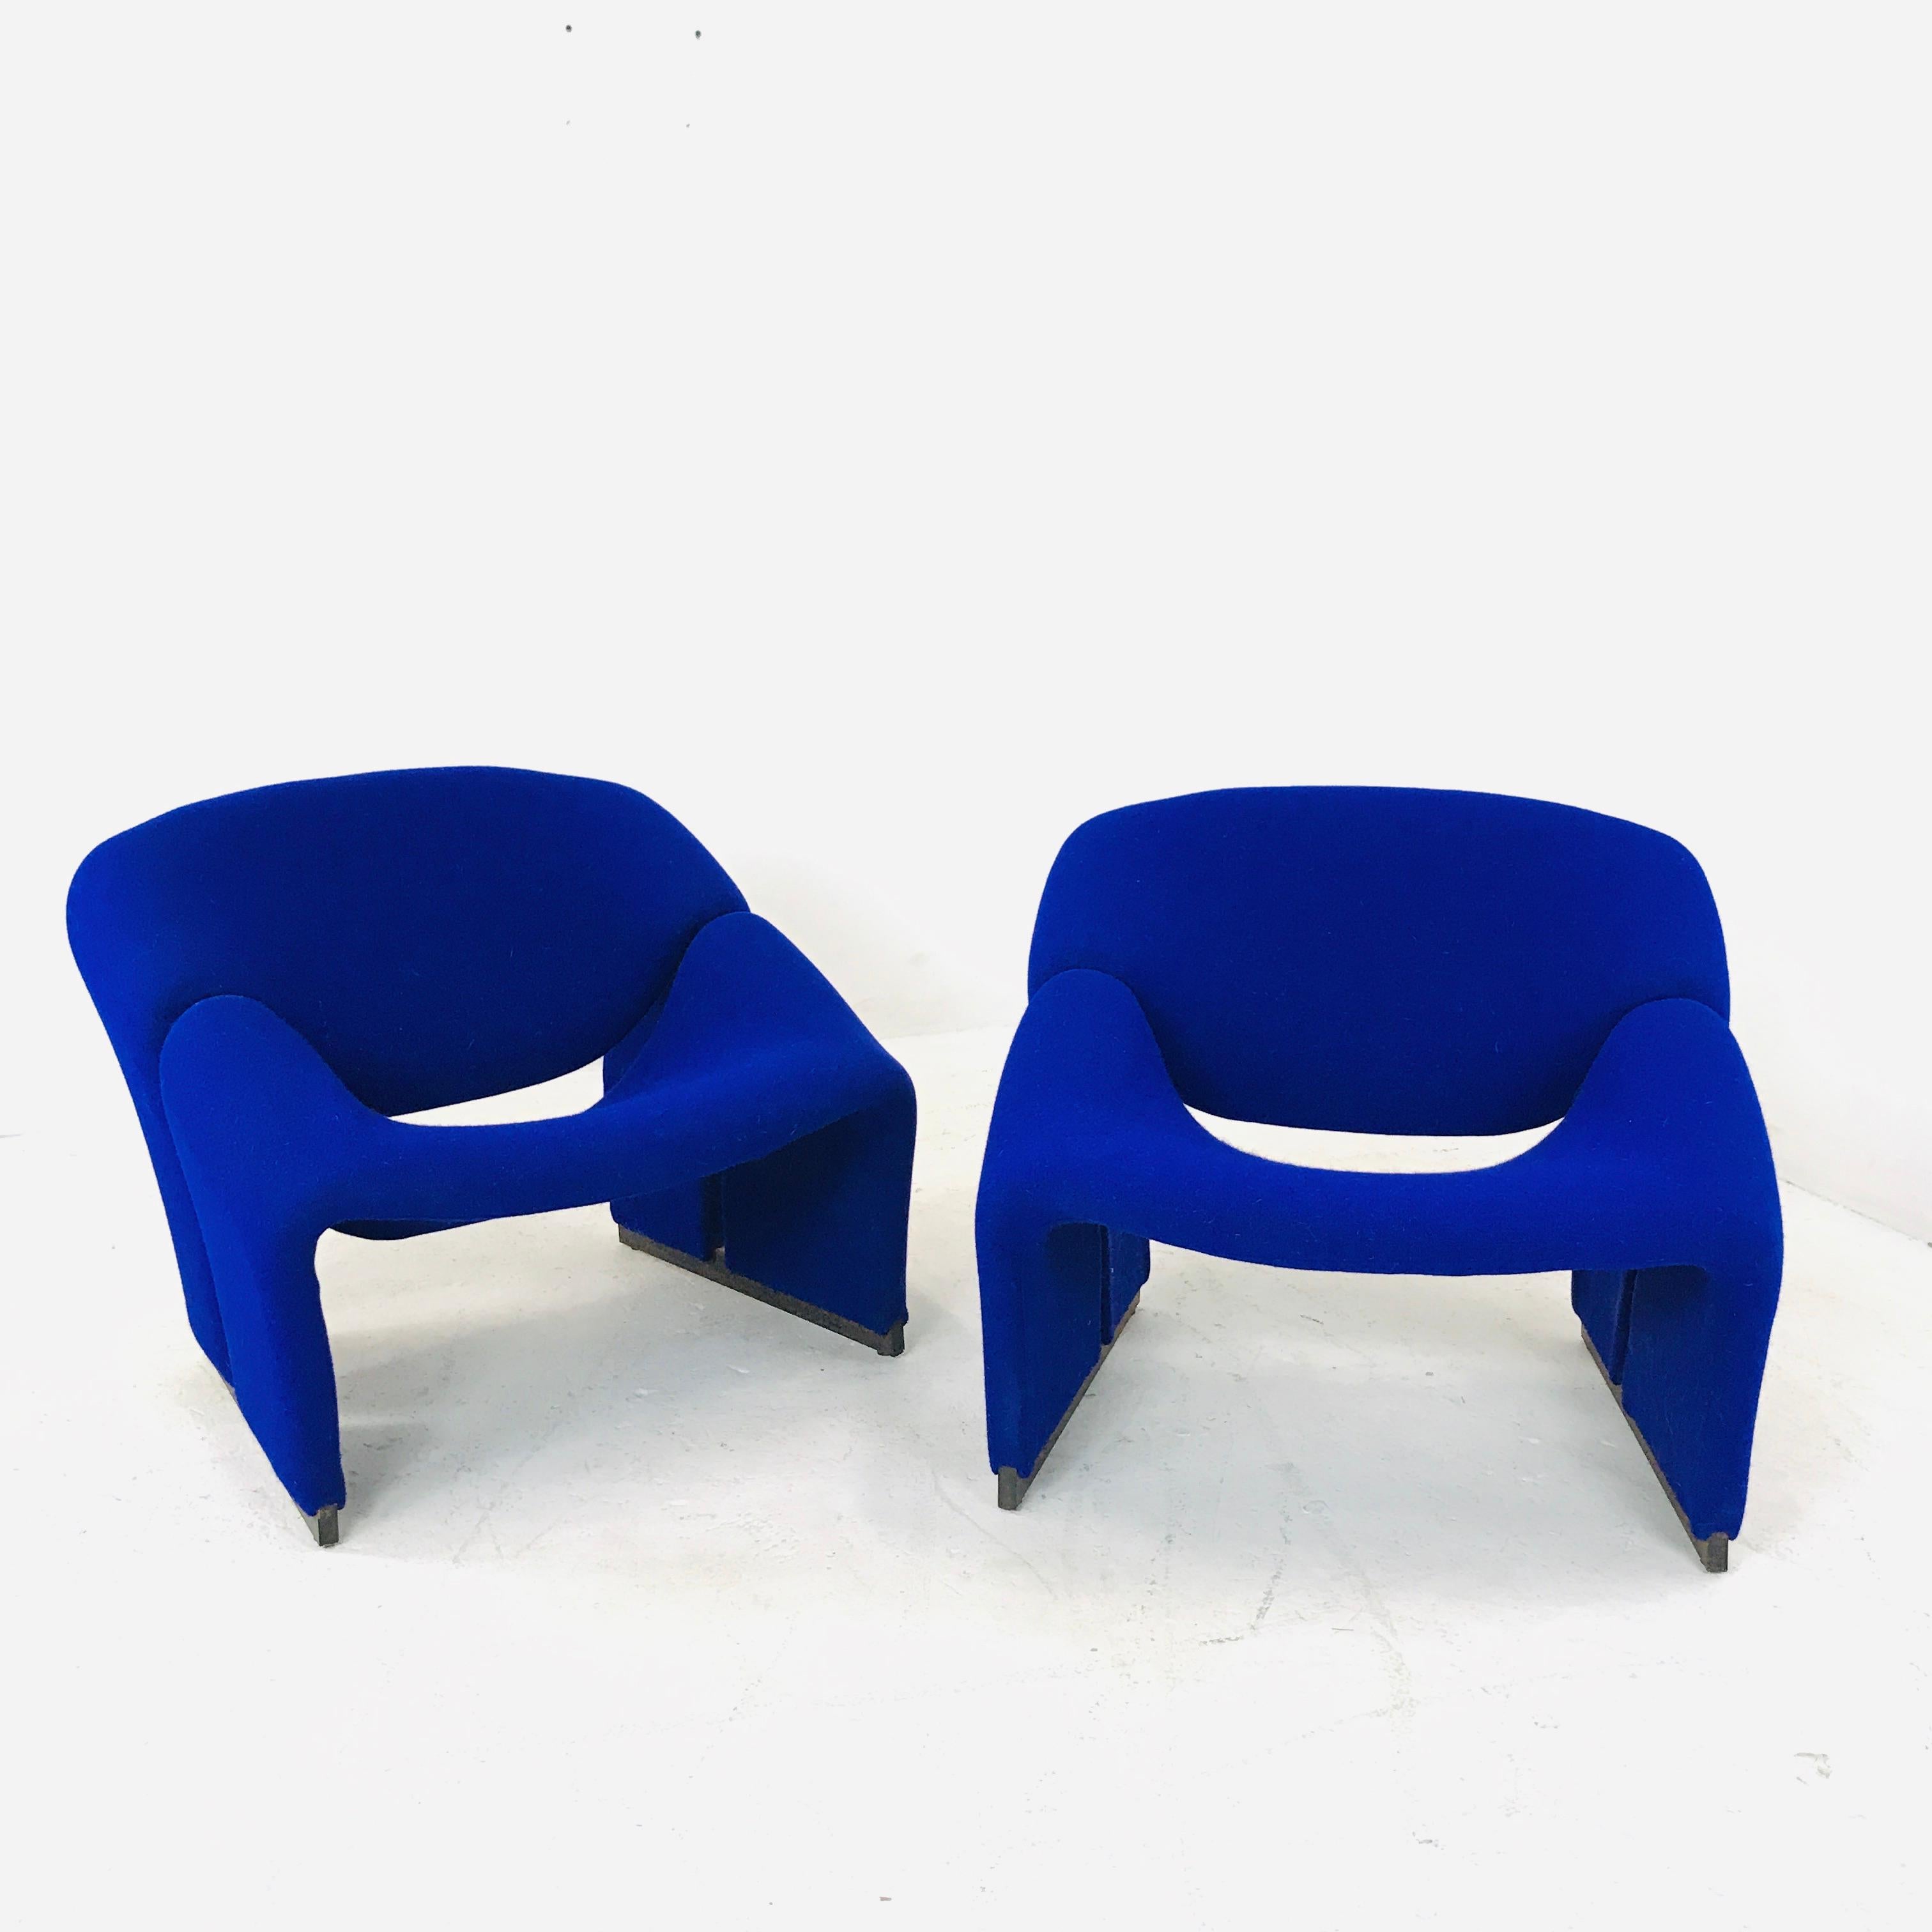 Pair of groovy lounge chairs, designed by top French designer Pierre Paulin for Holland’s most Avant Garde furniture maker, Artifort, in 1972. The chair consists of two curved parts that form together the legs, the seat and the backrest. The legs